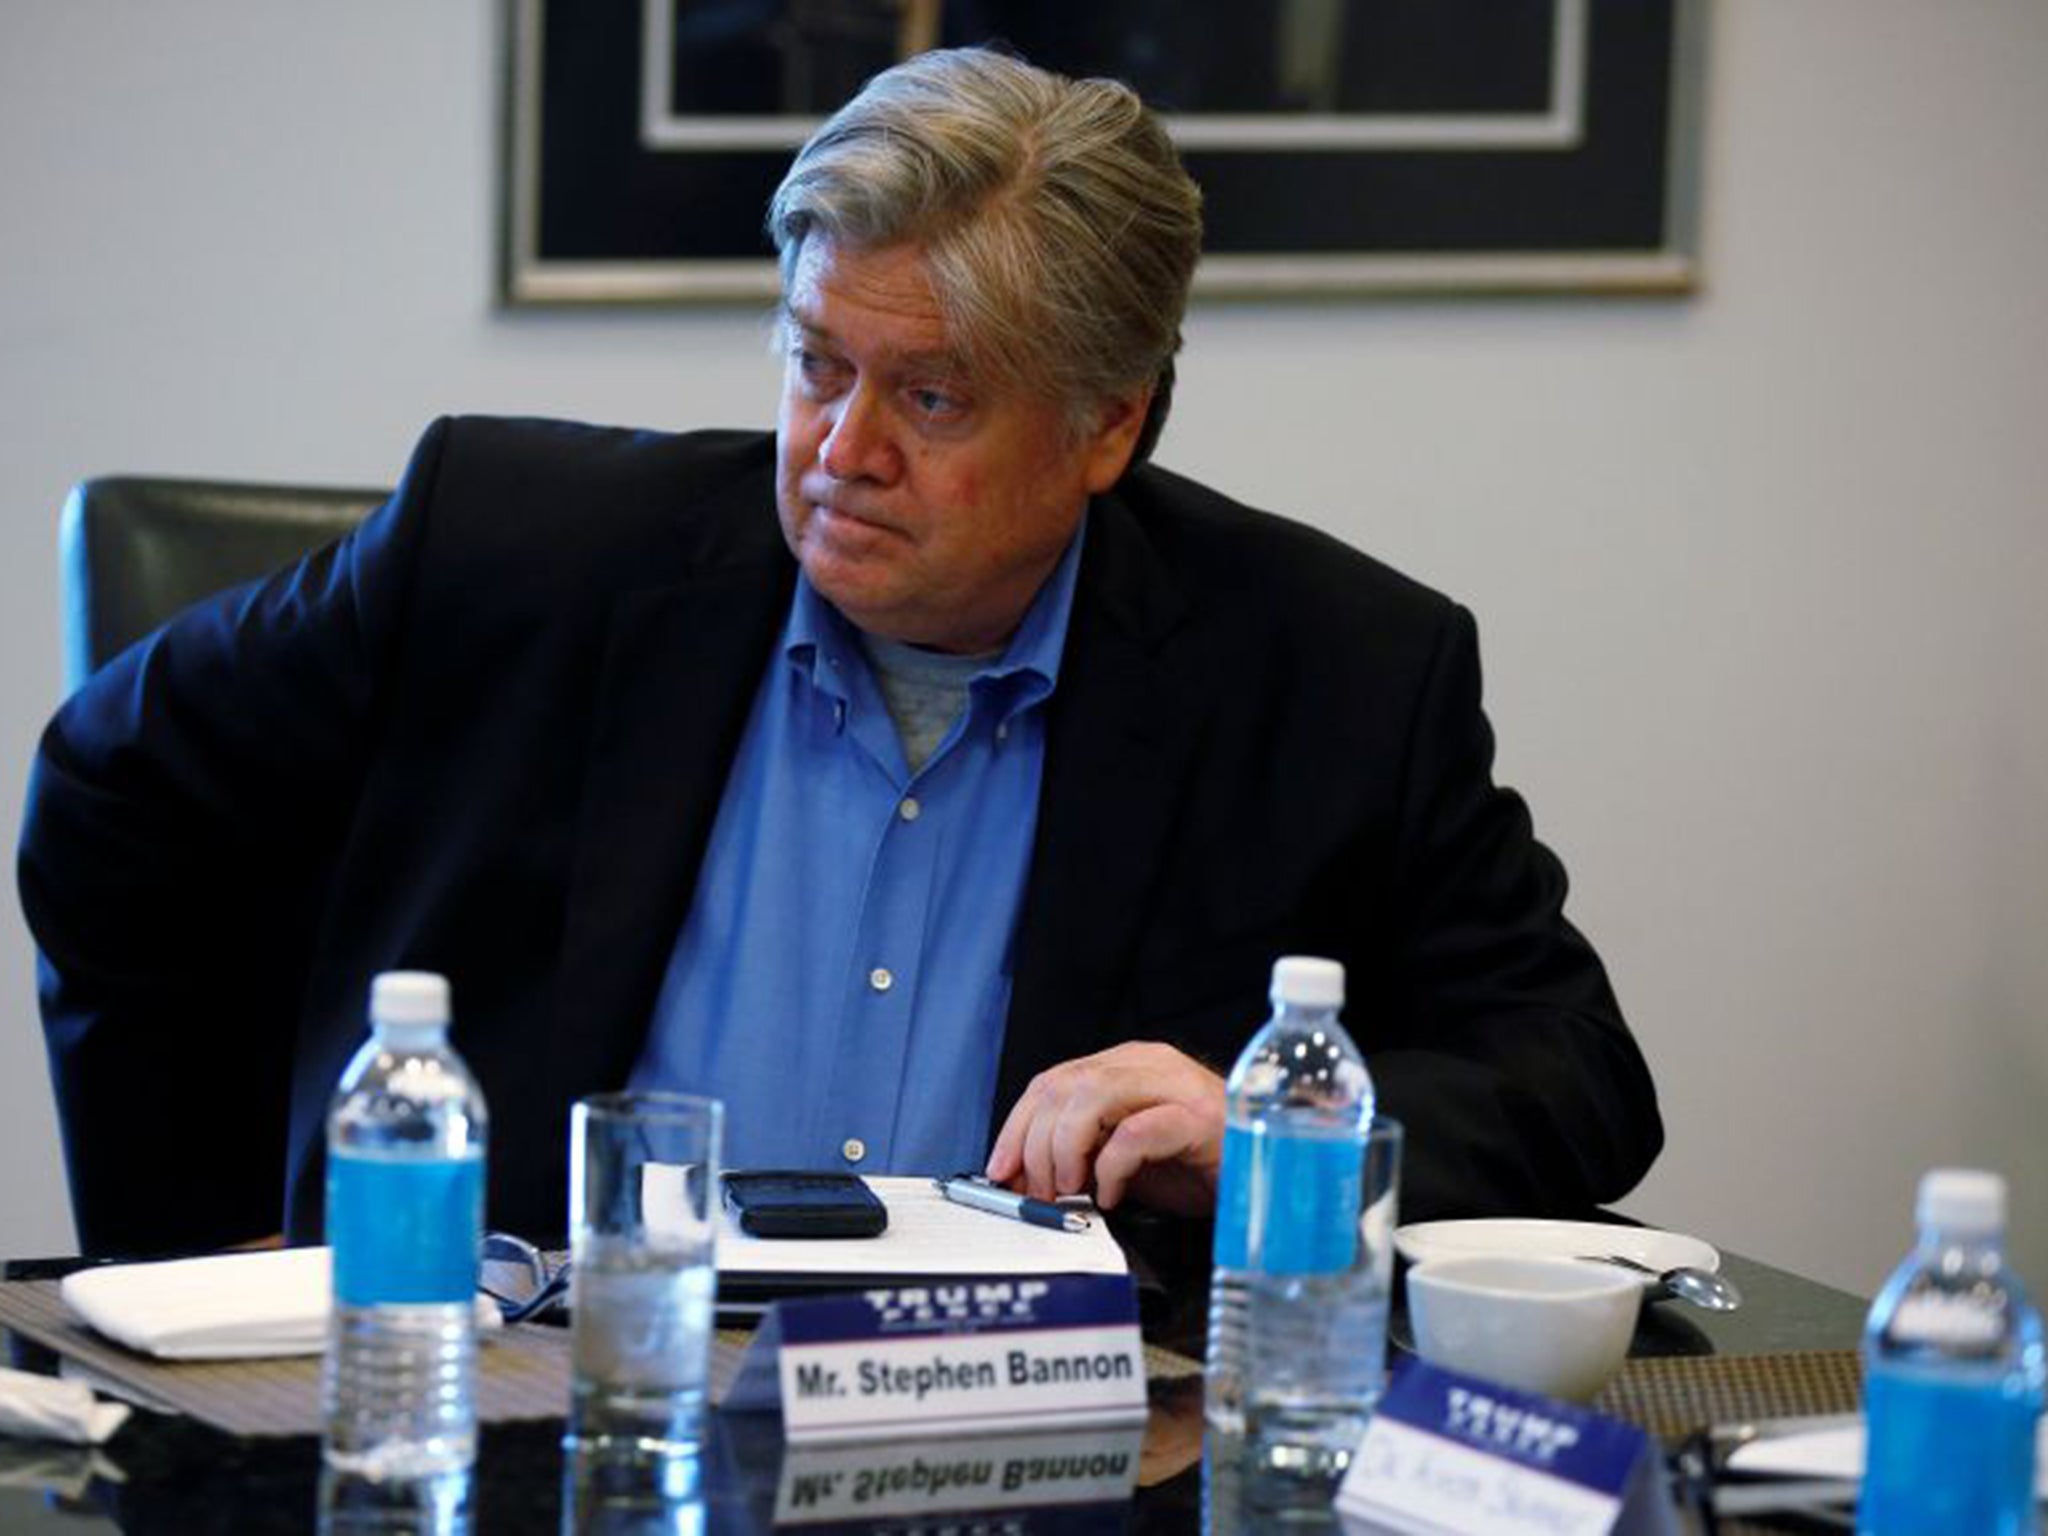 Bannon, 62, is a former naval officer, investment banker and film producer